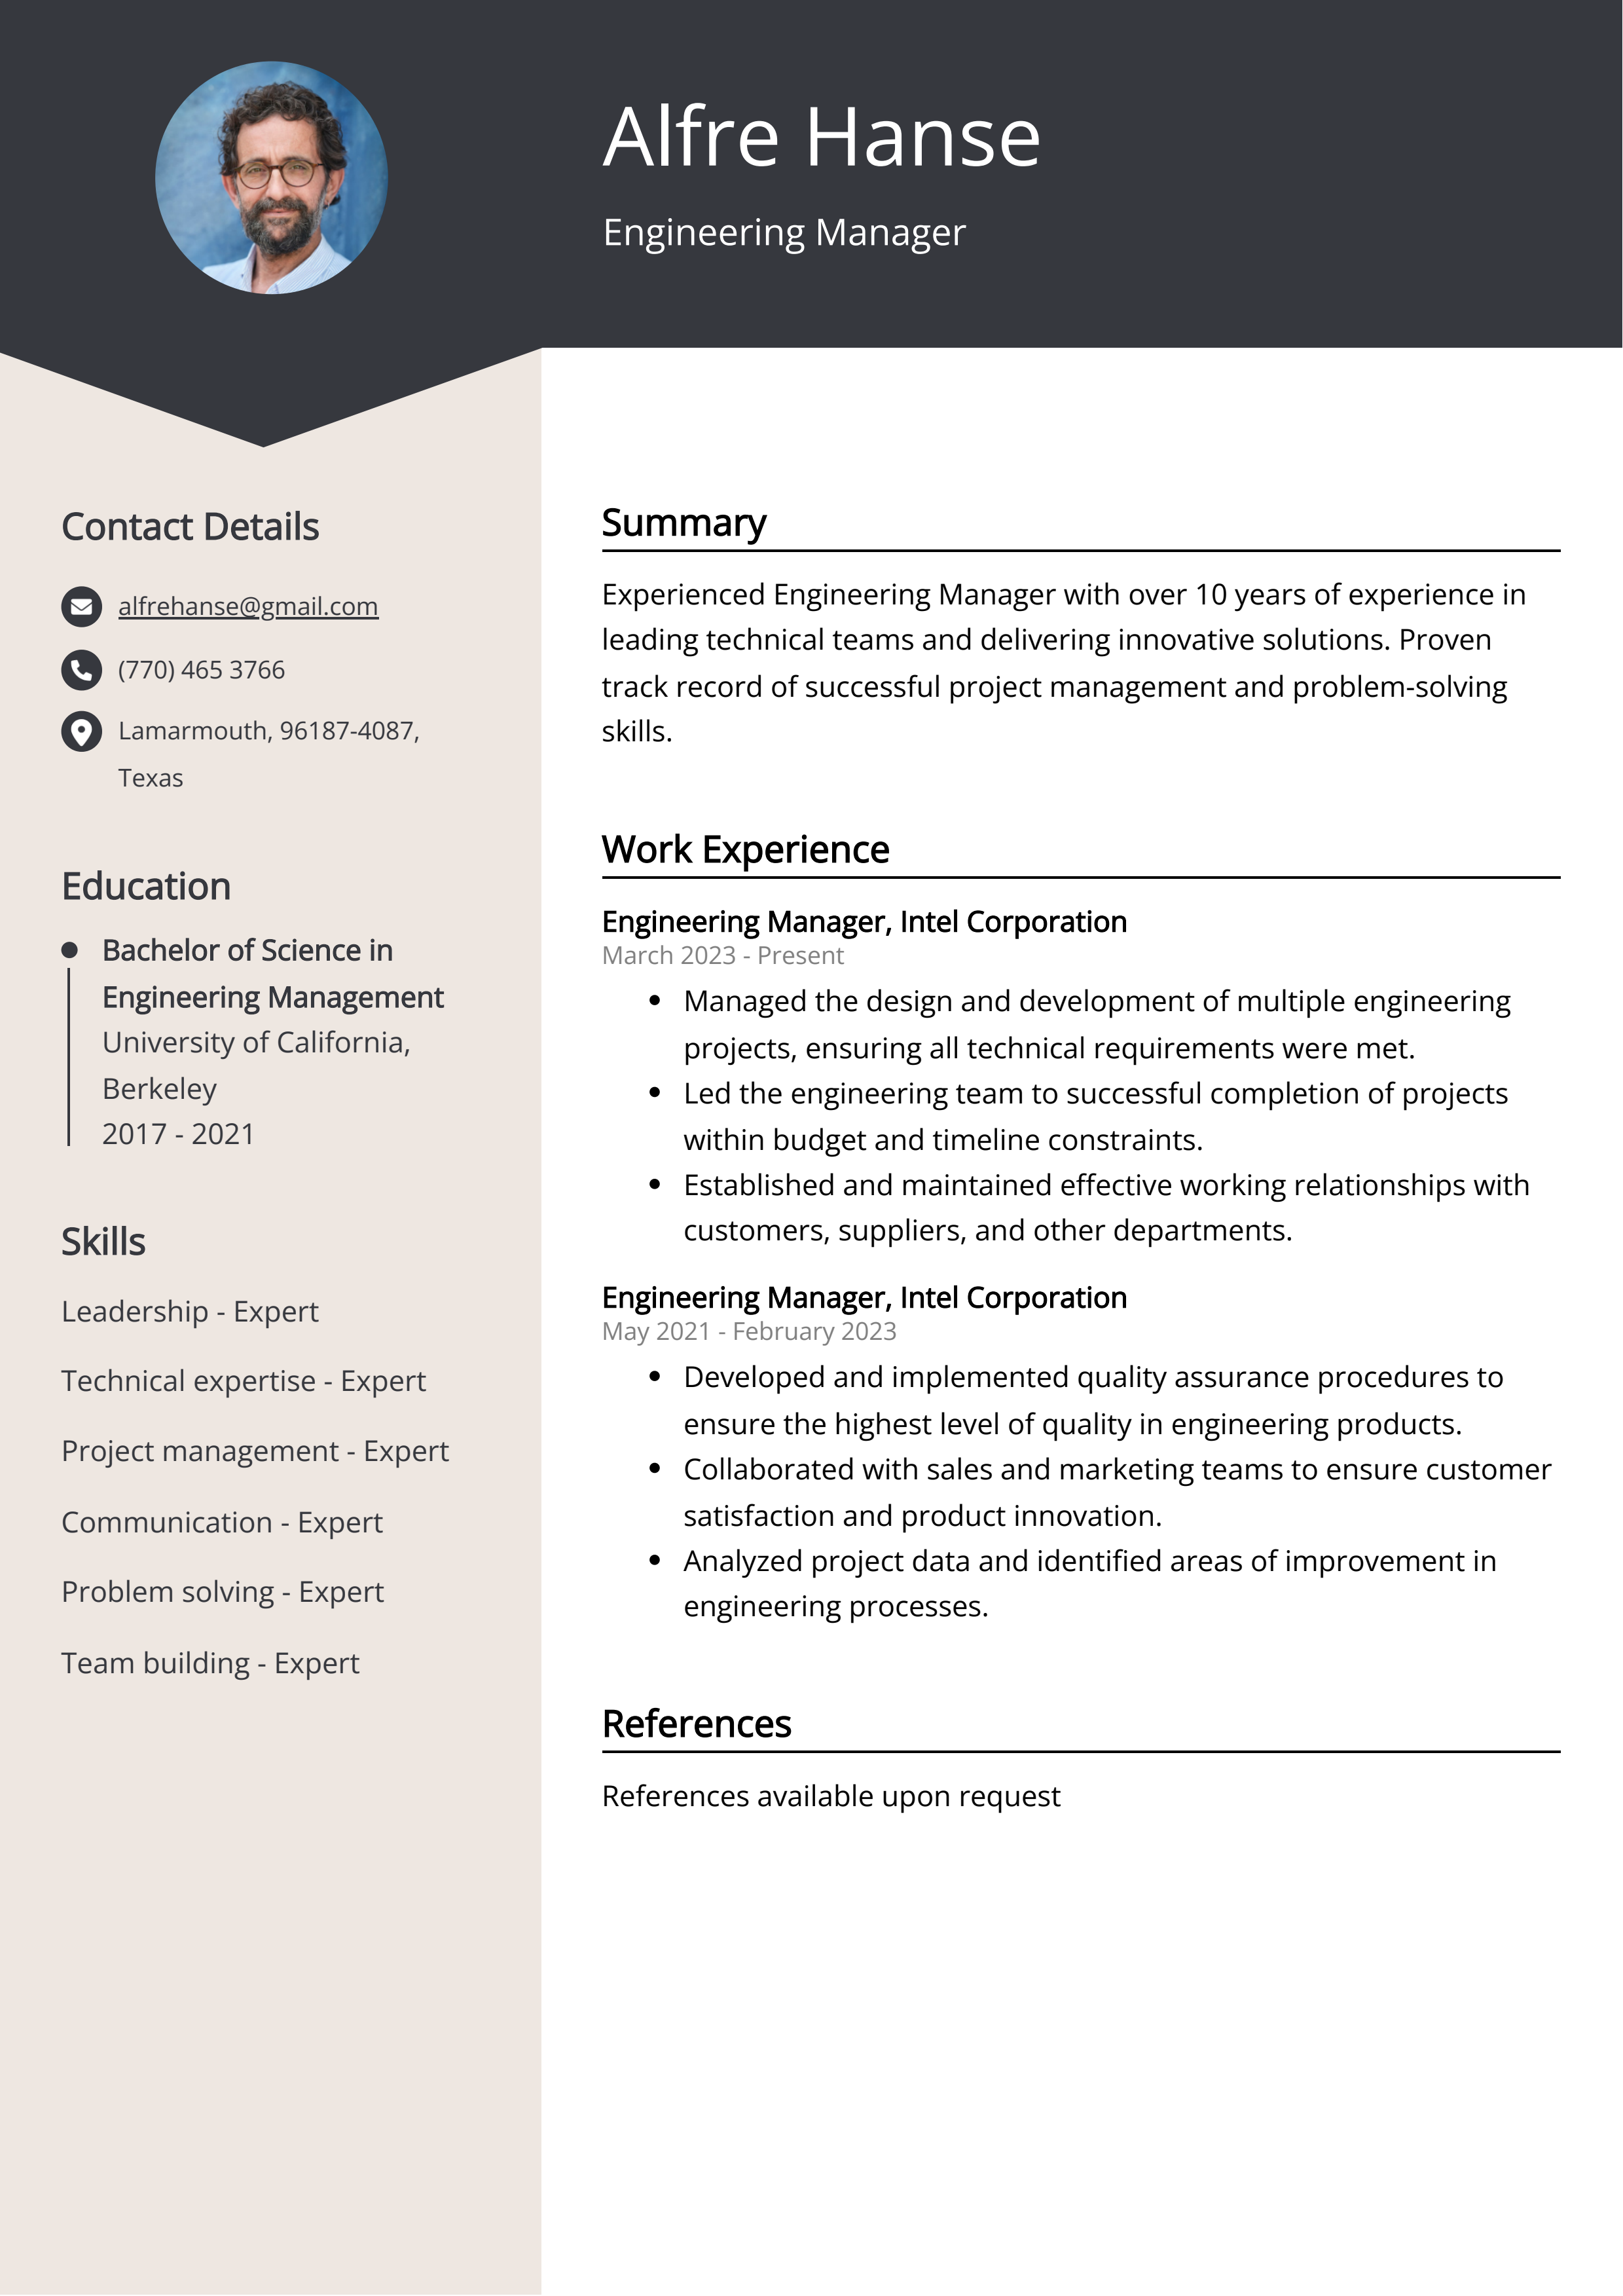 Engineering Manager Resume Example